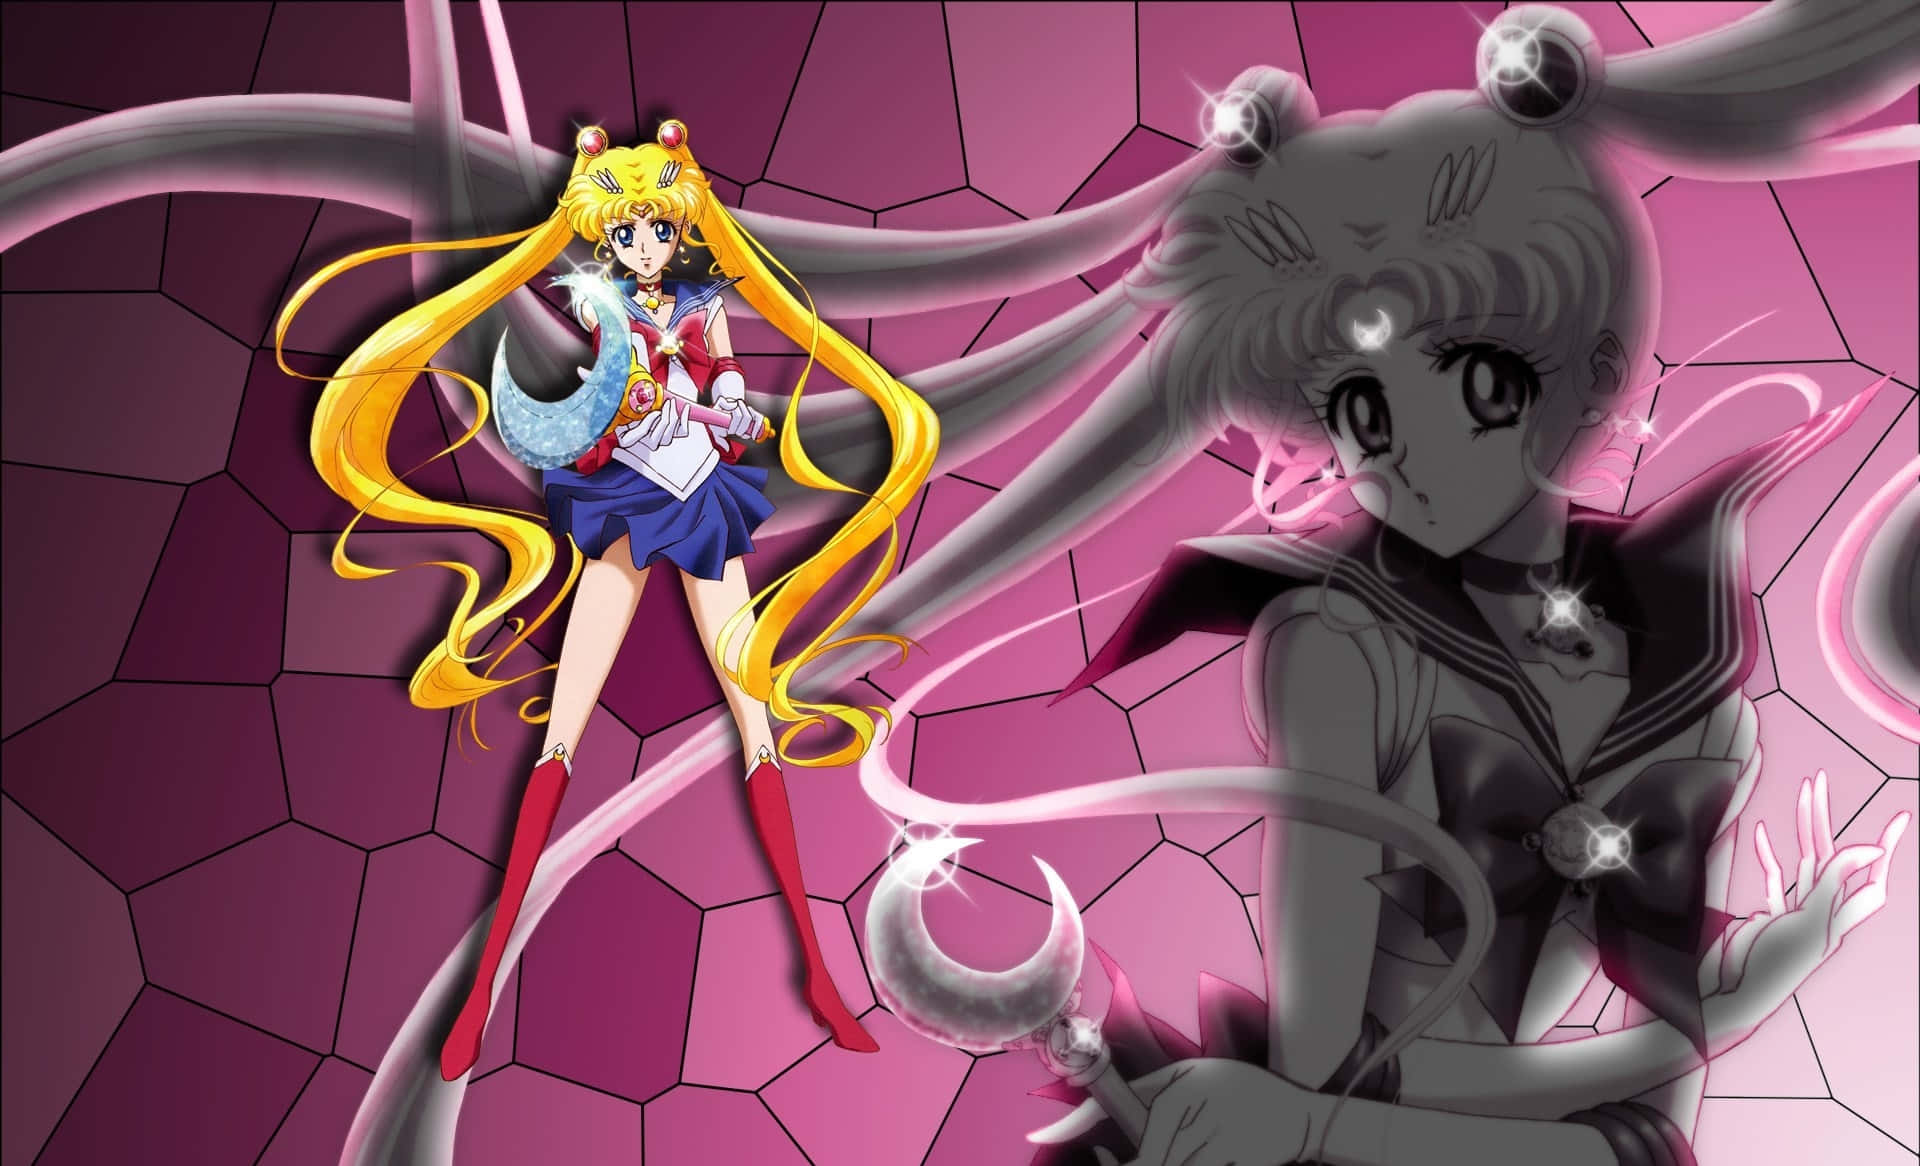 "Sailor Moon: Saving the world one fight at a time"